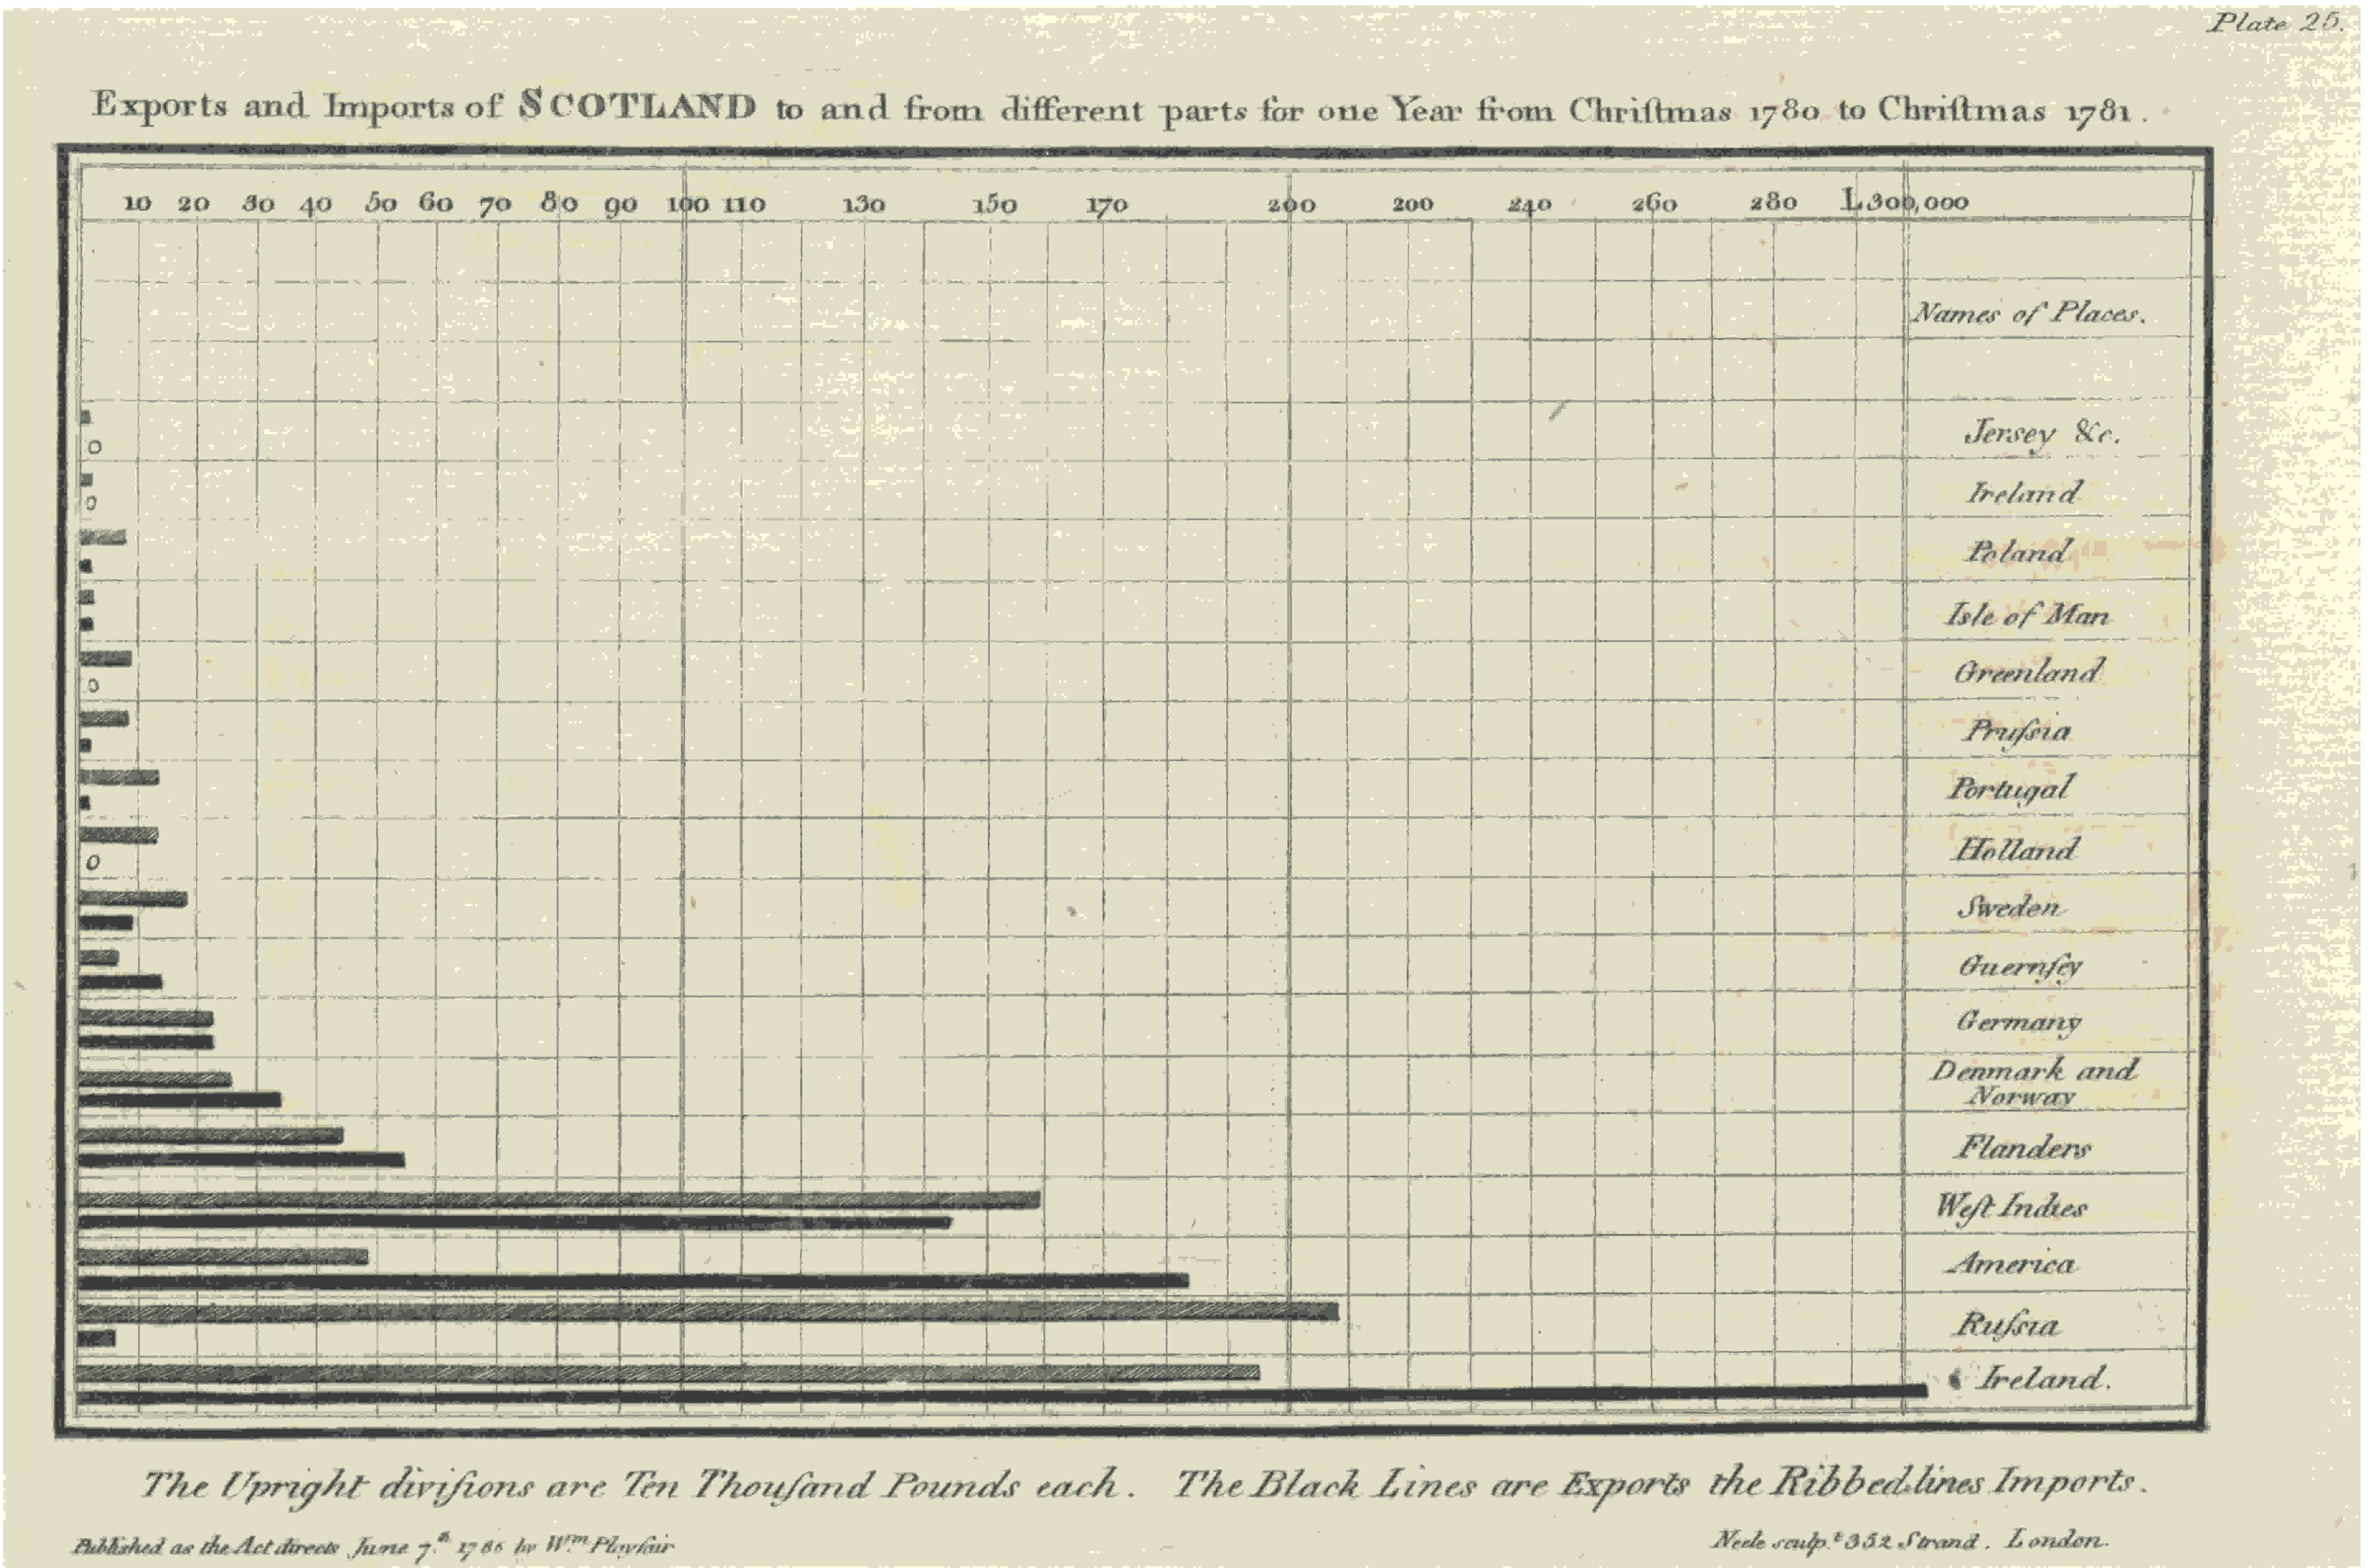 Playfair’s first bar chart: Playfair’s bar chart of the imports (gray bars) and exports (black) to Scotland in 1781 from 17 different places.